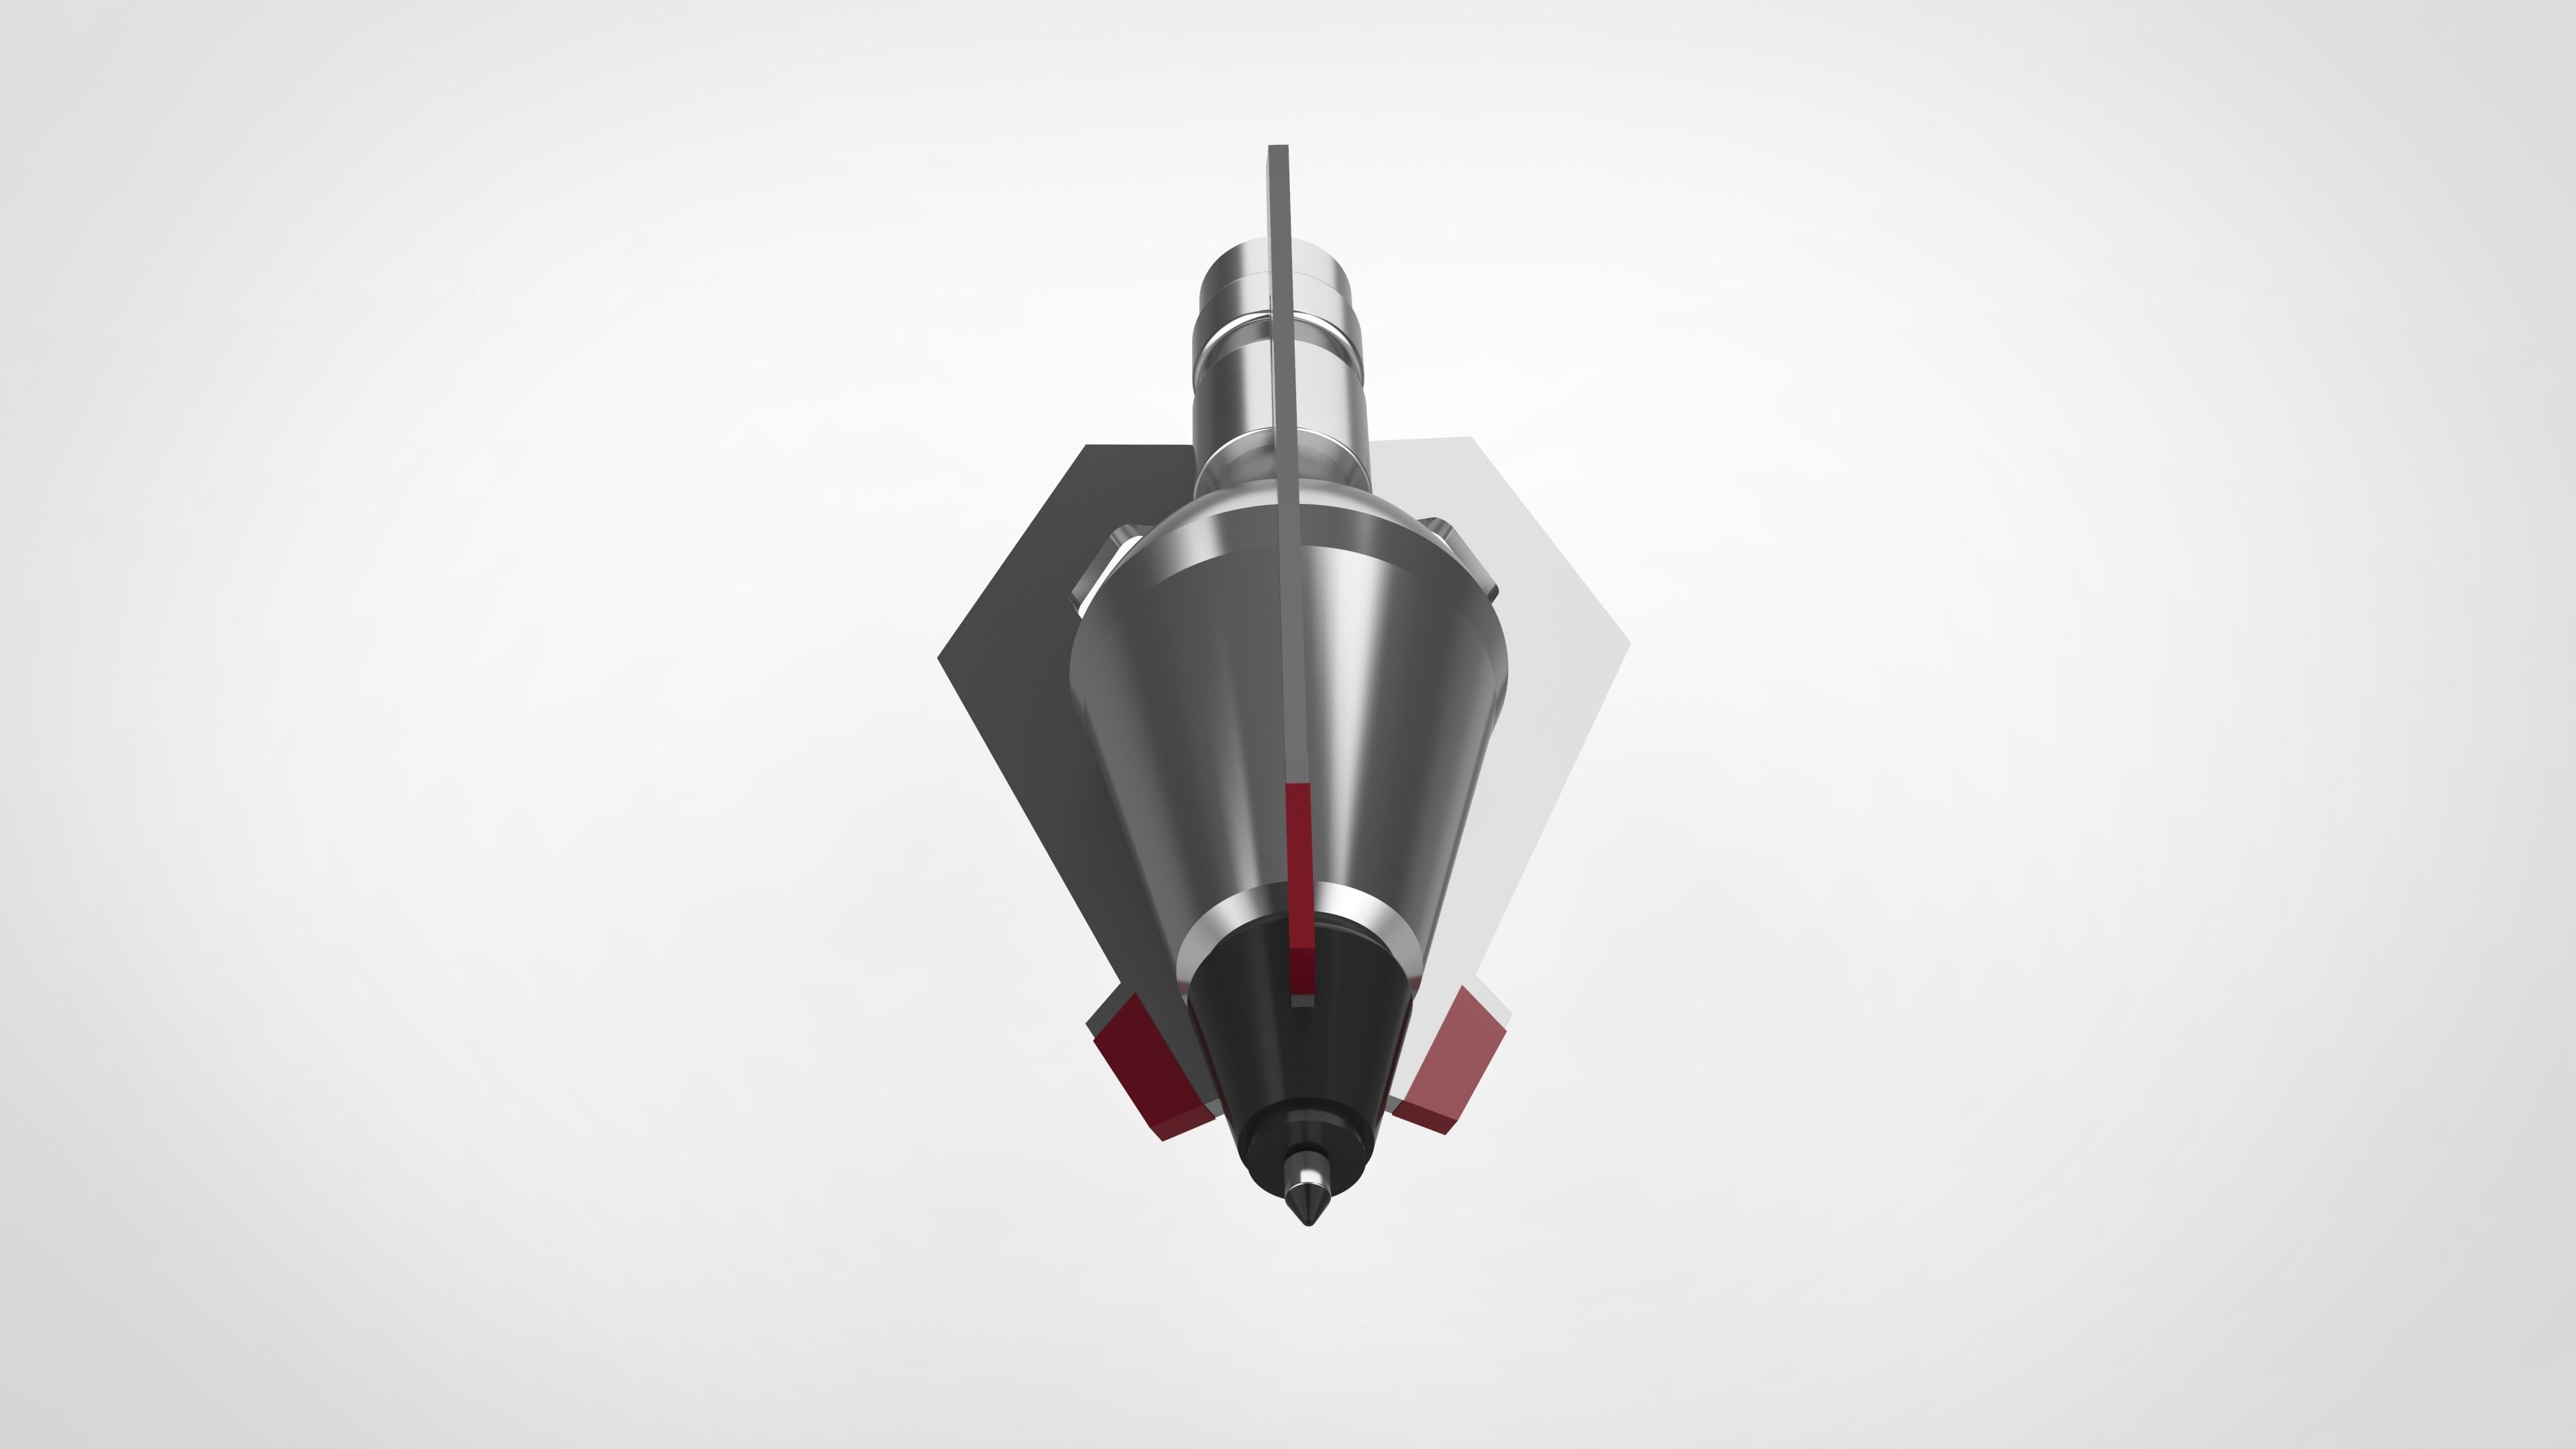 012.jpg Download file The Hawkeye arrowhead 4 from the movie "Avengers: Age of Ultron" • 3D print design, vetrock